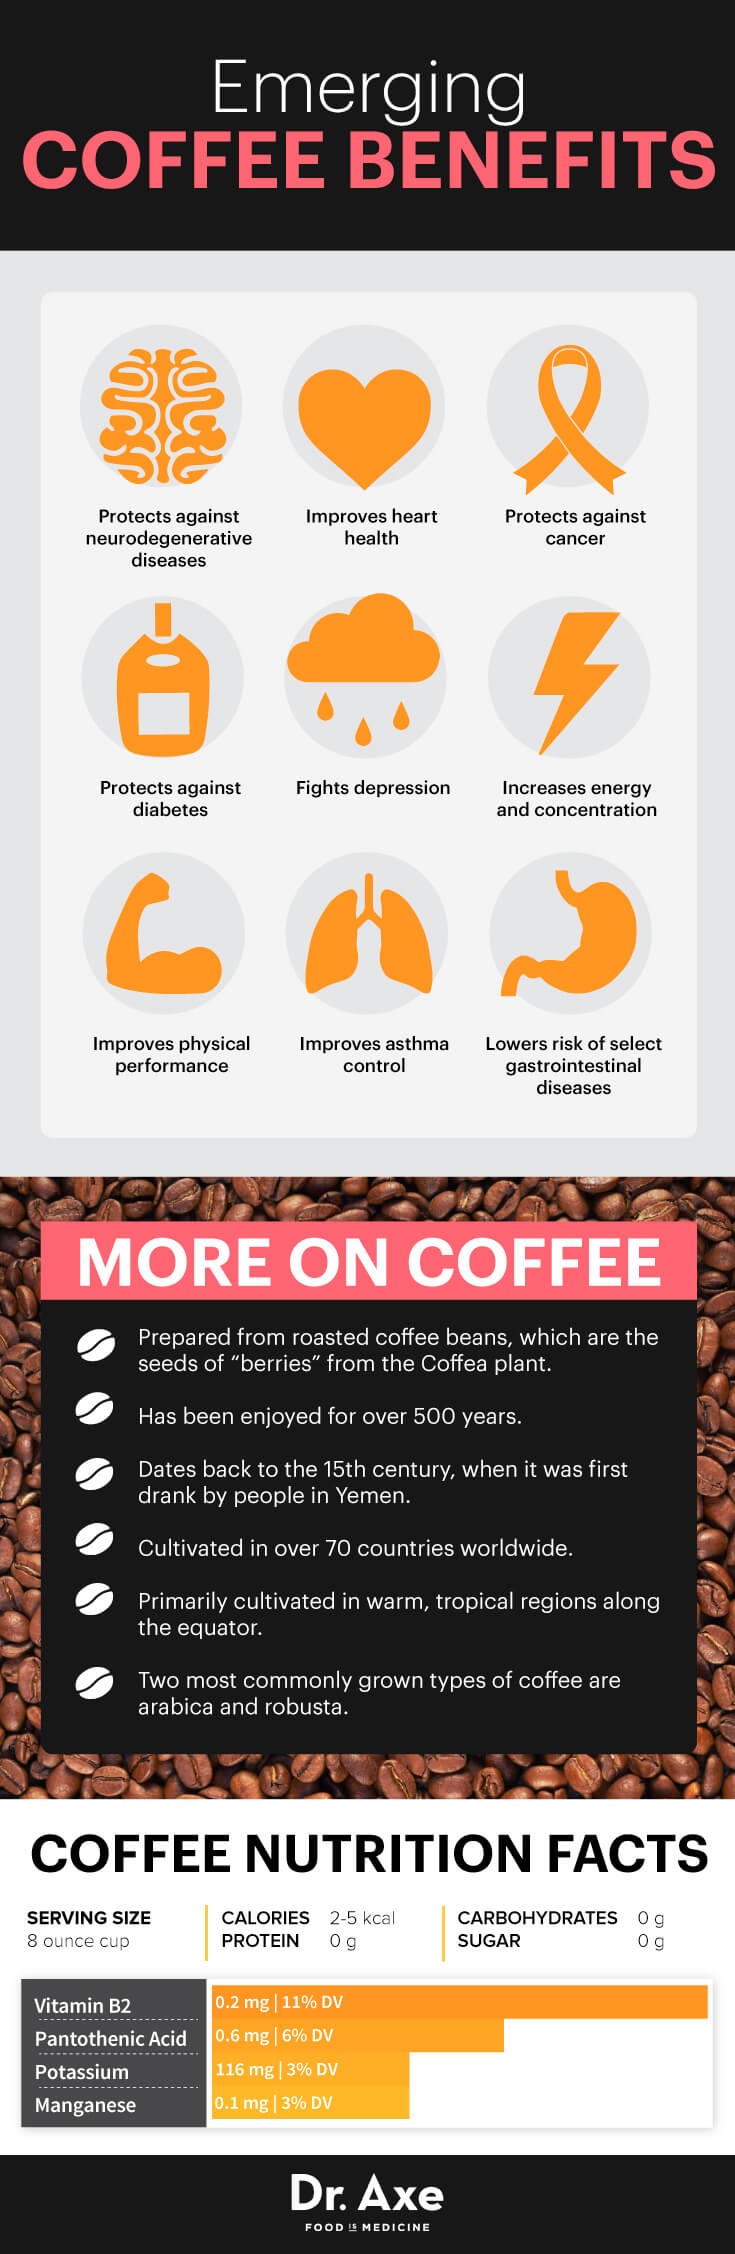 What are the potential side effects of Sehat Badan coffee?